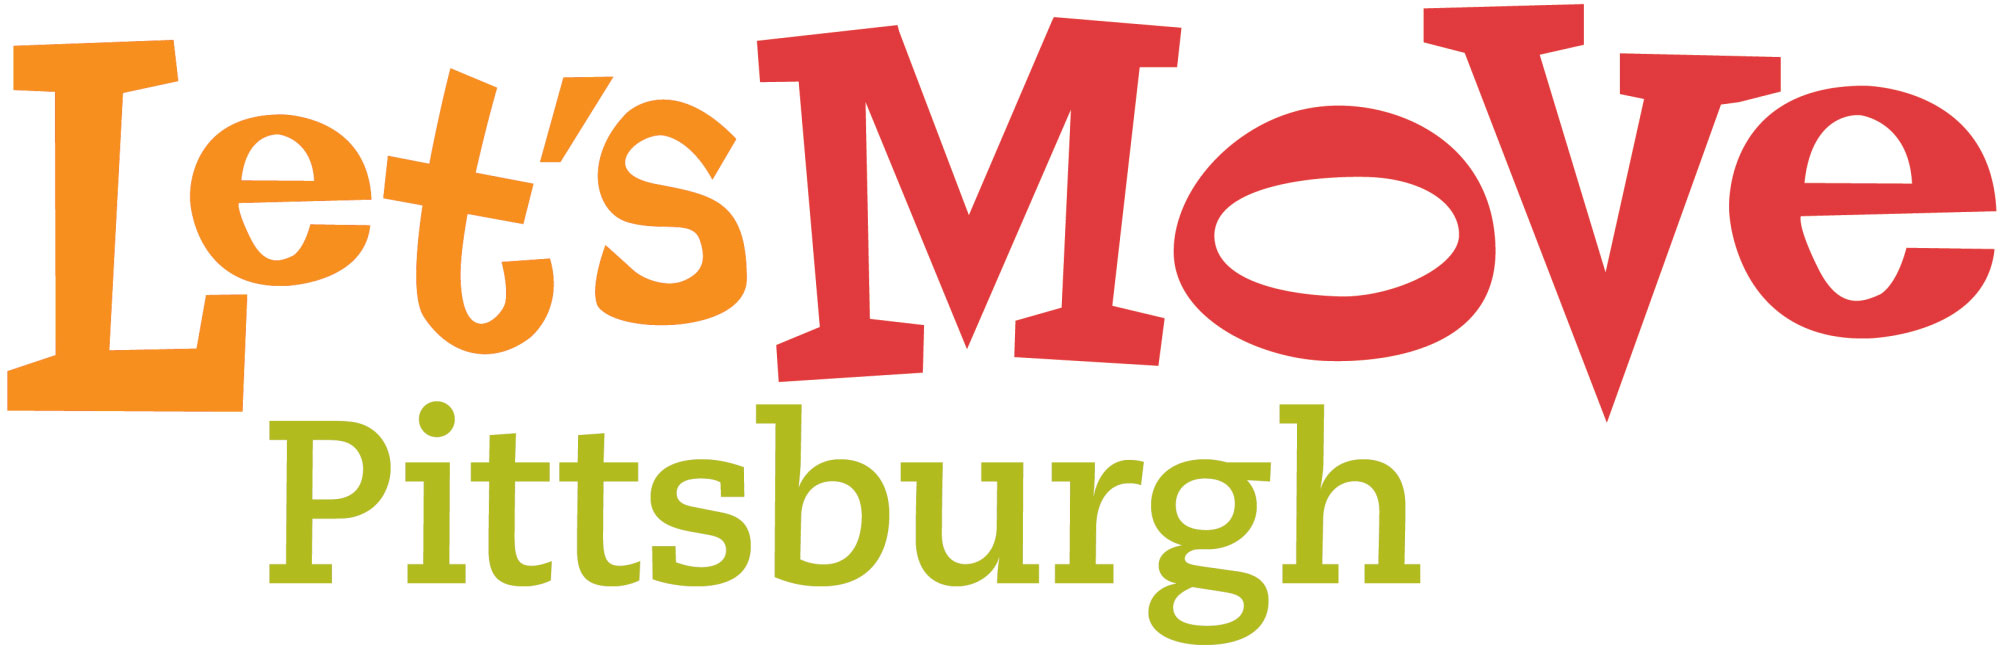 Let's Move Pittsburgh logo